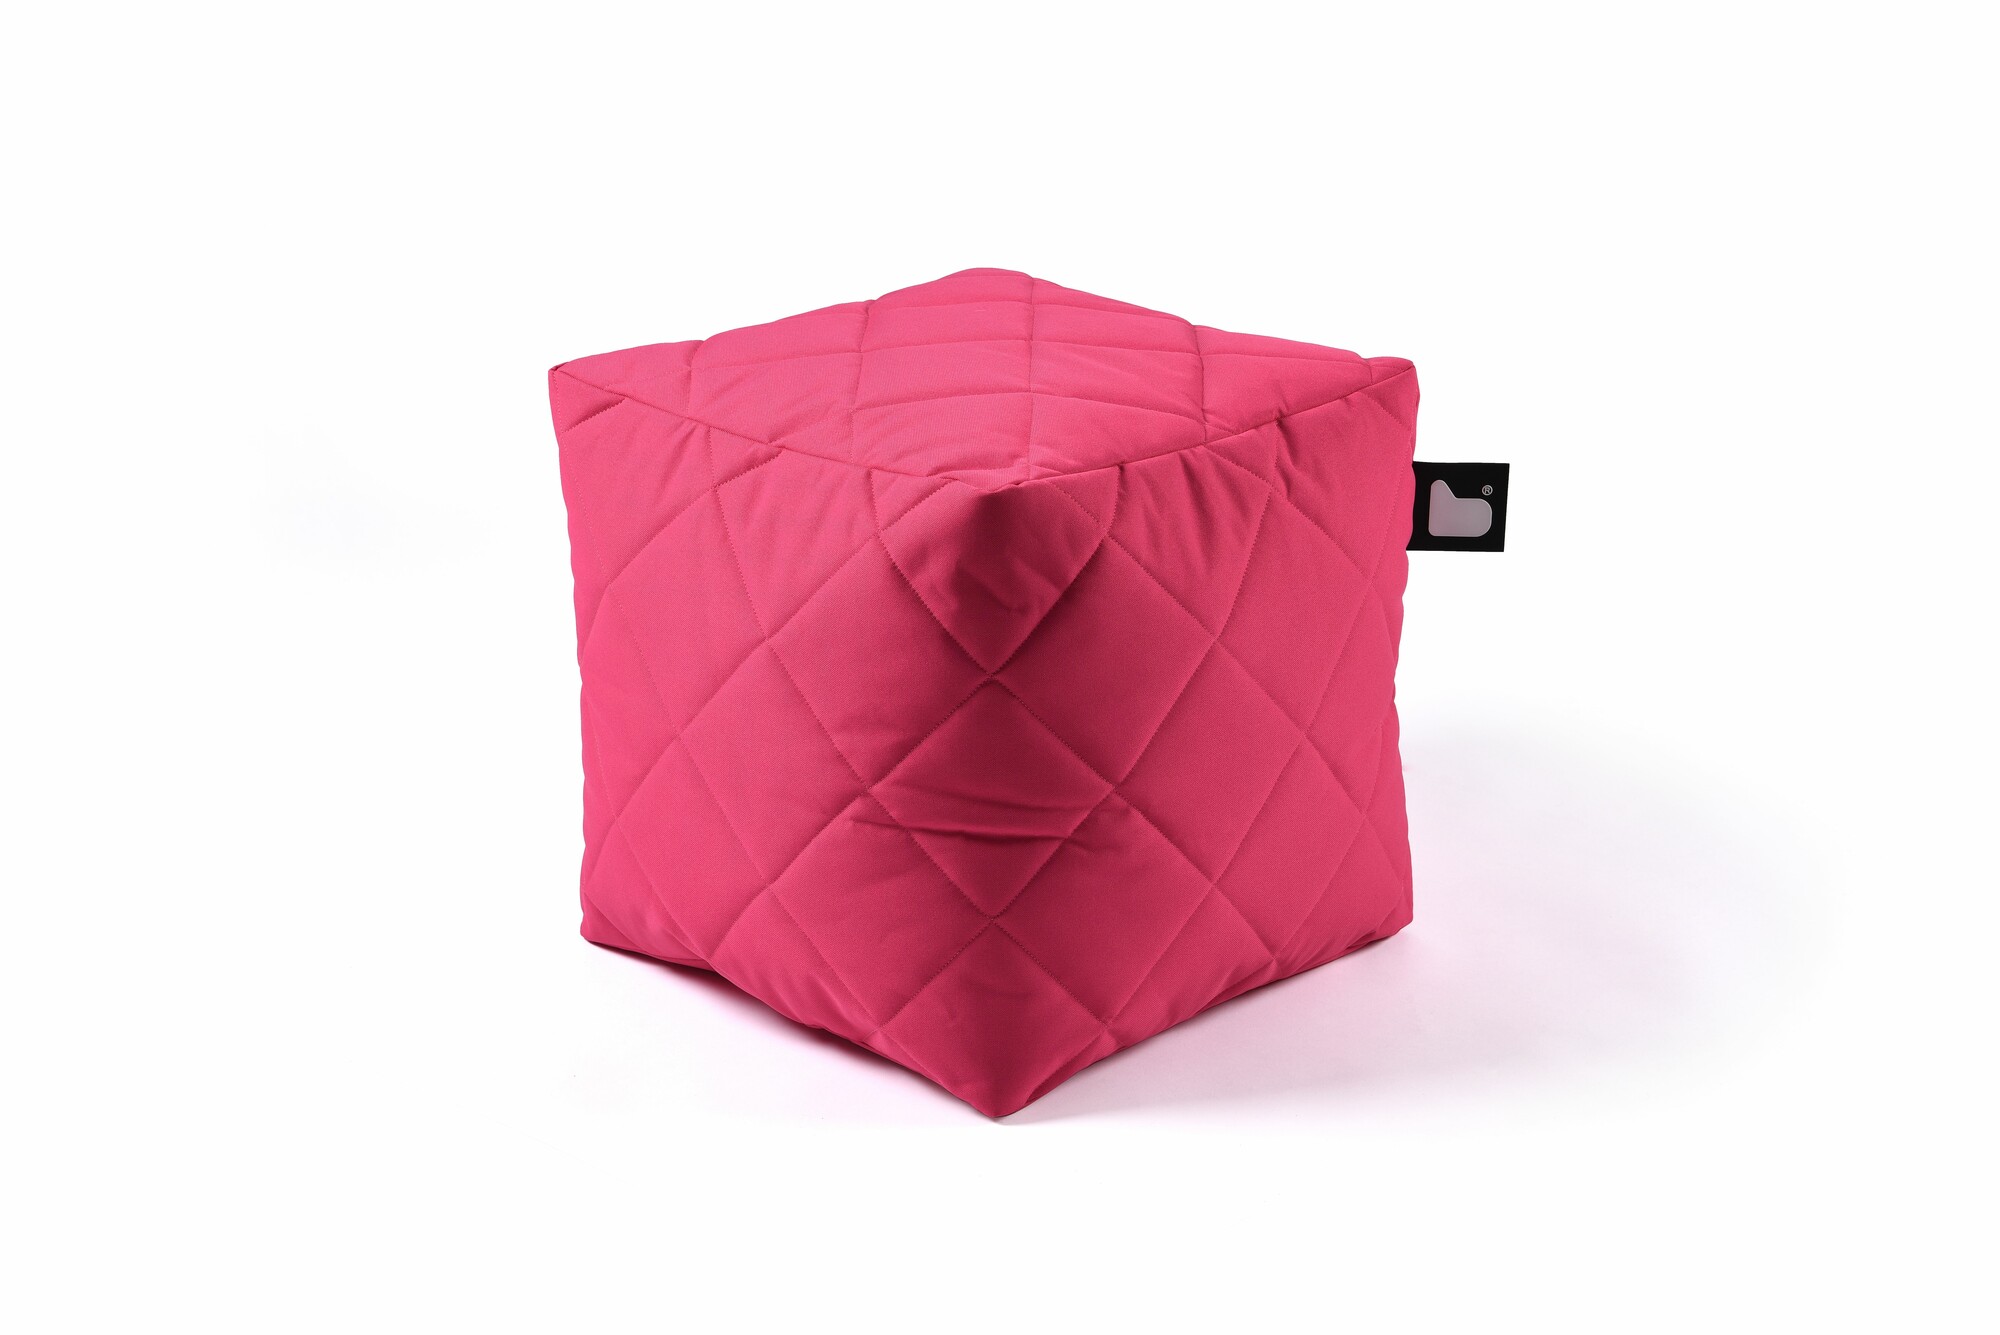 Extreme Lounging B-Box Quilted Pink